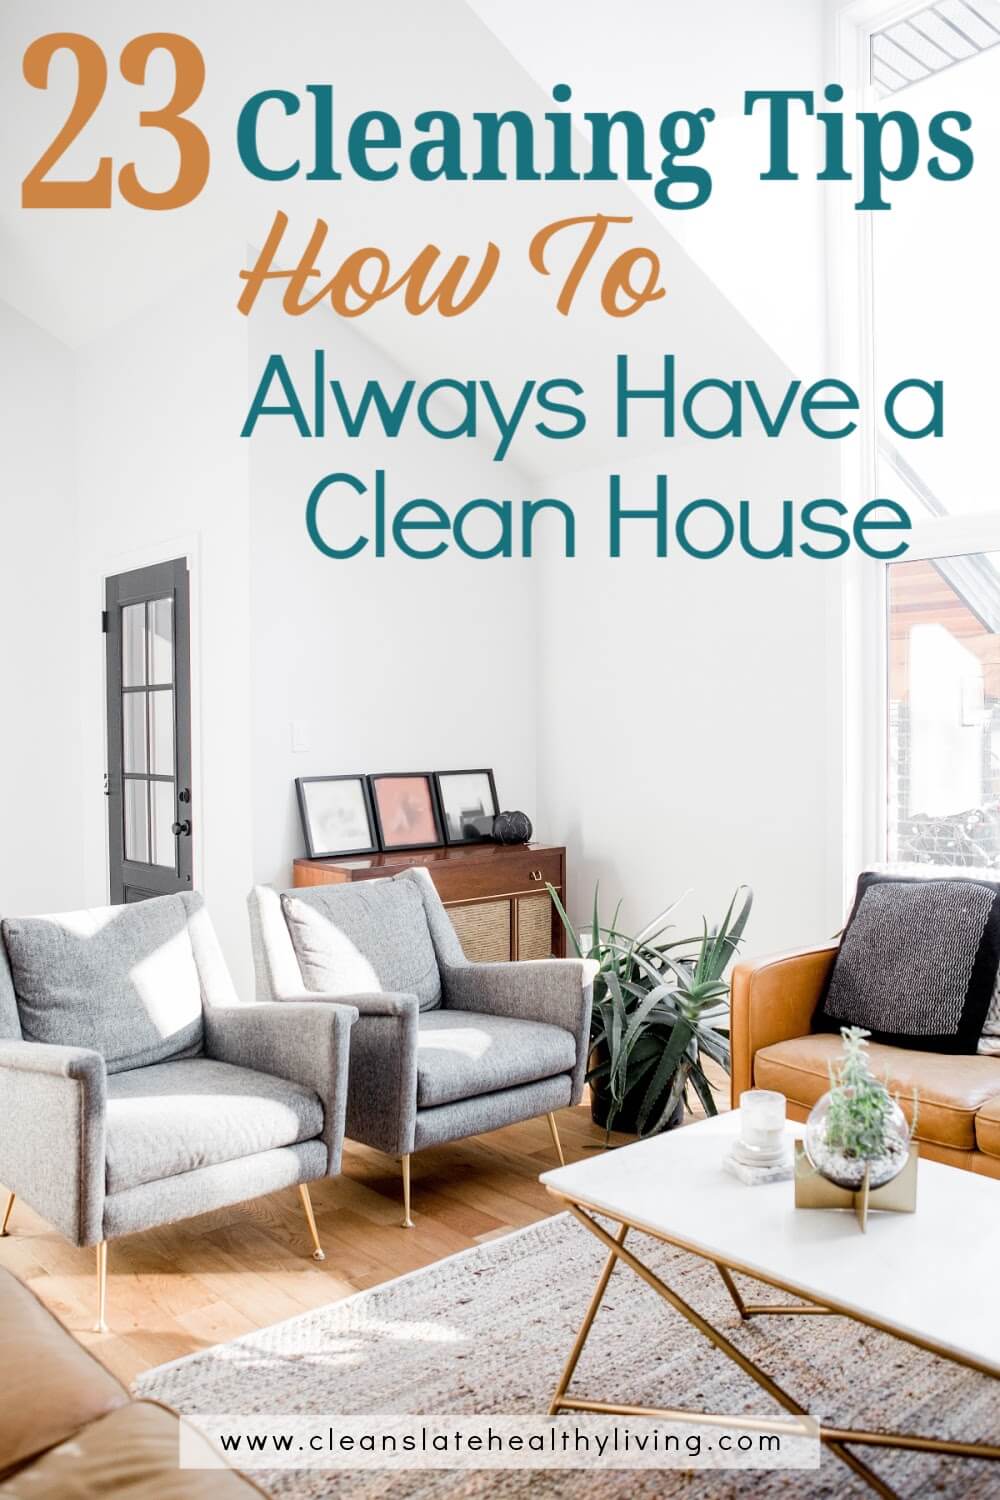 23 cleaning tips. How to always have a clean house.